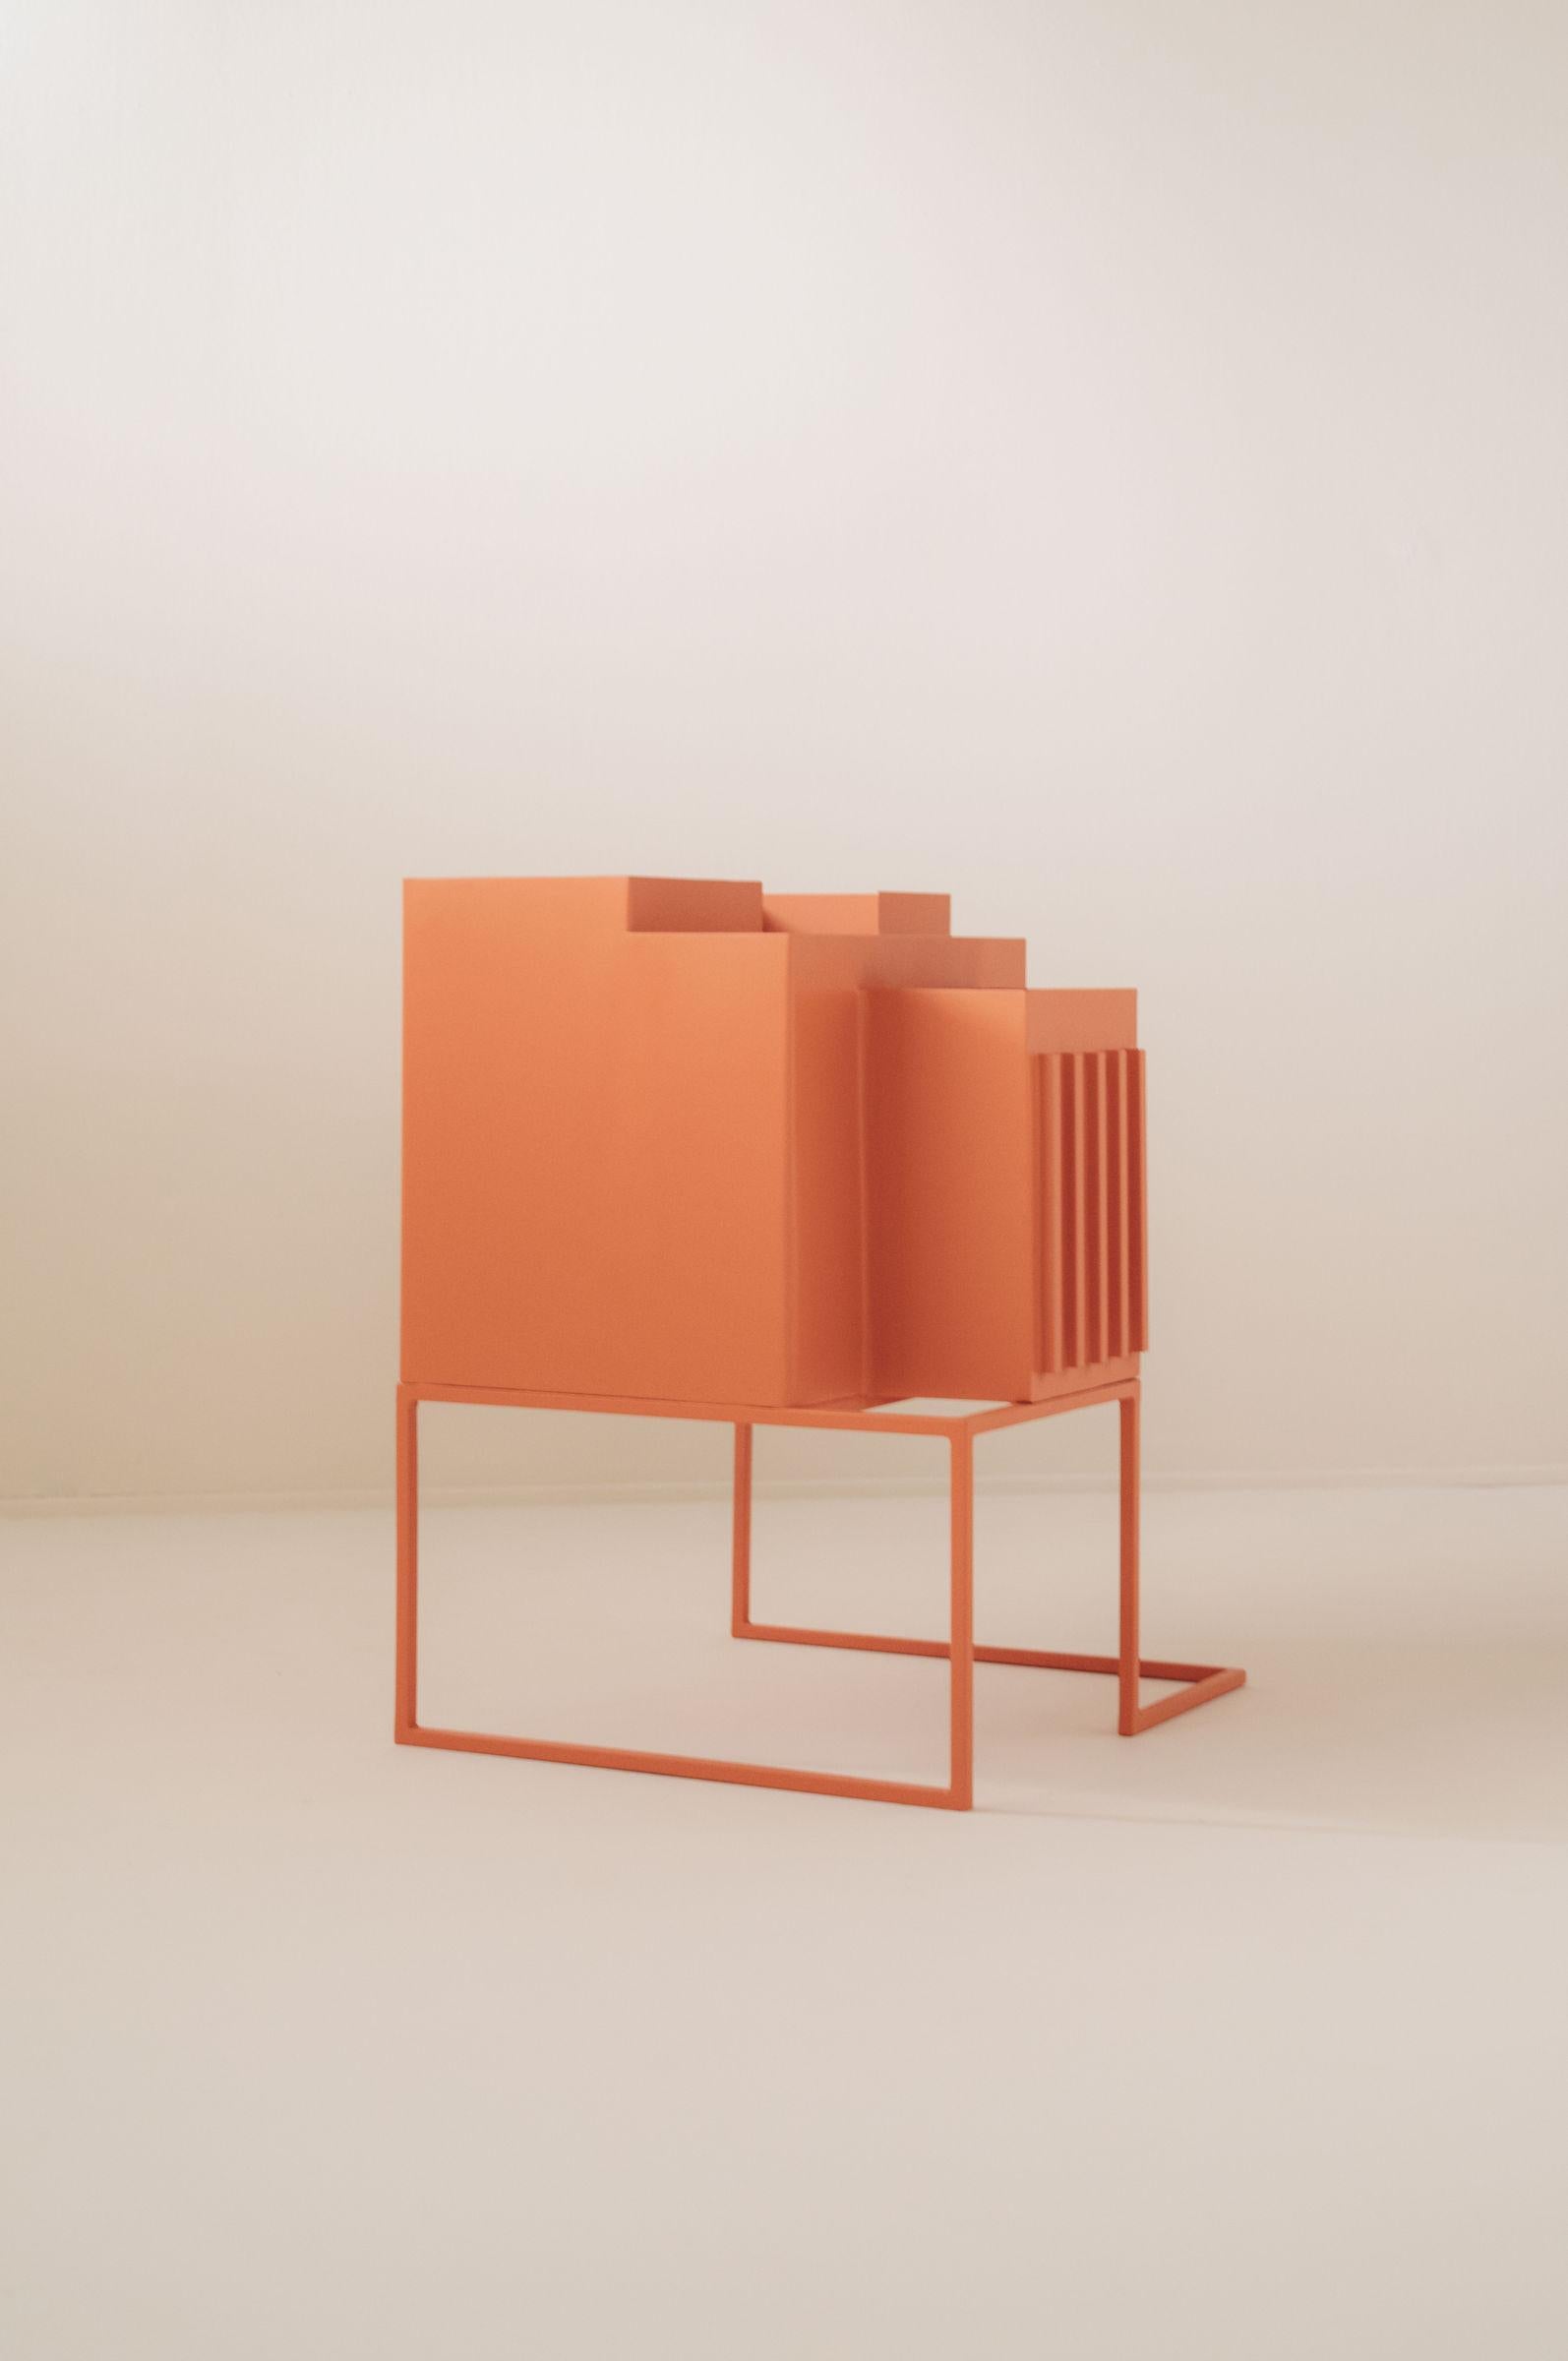 Post-modern sculpture Brutante B in terracotta lacquered metal handmade in Panama by Fi. 

Brutantes presents a series of functional sculptural objects created from the mixture, abstraction and transmutation between everyday artifacts and brutalism,